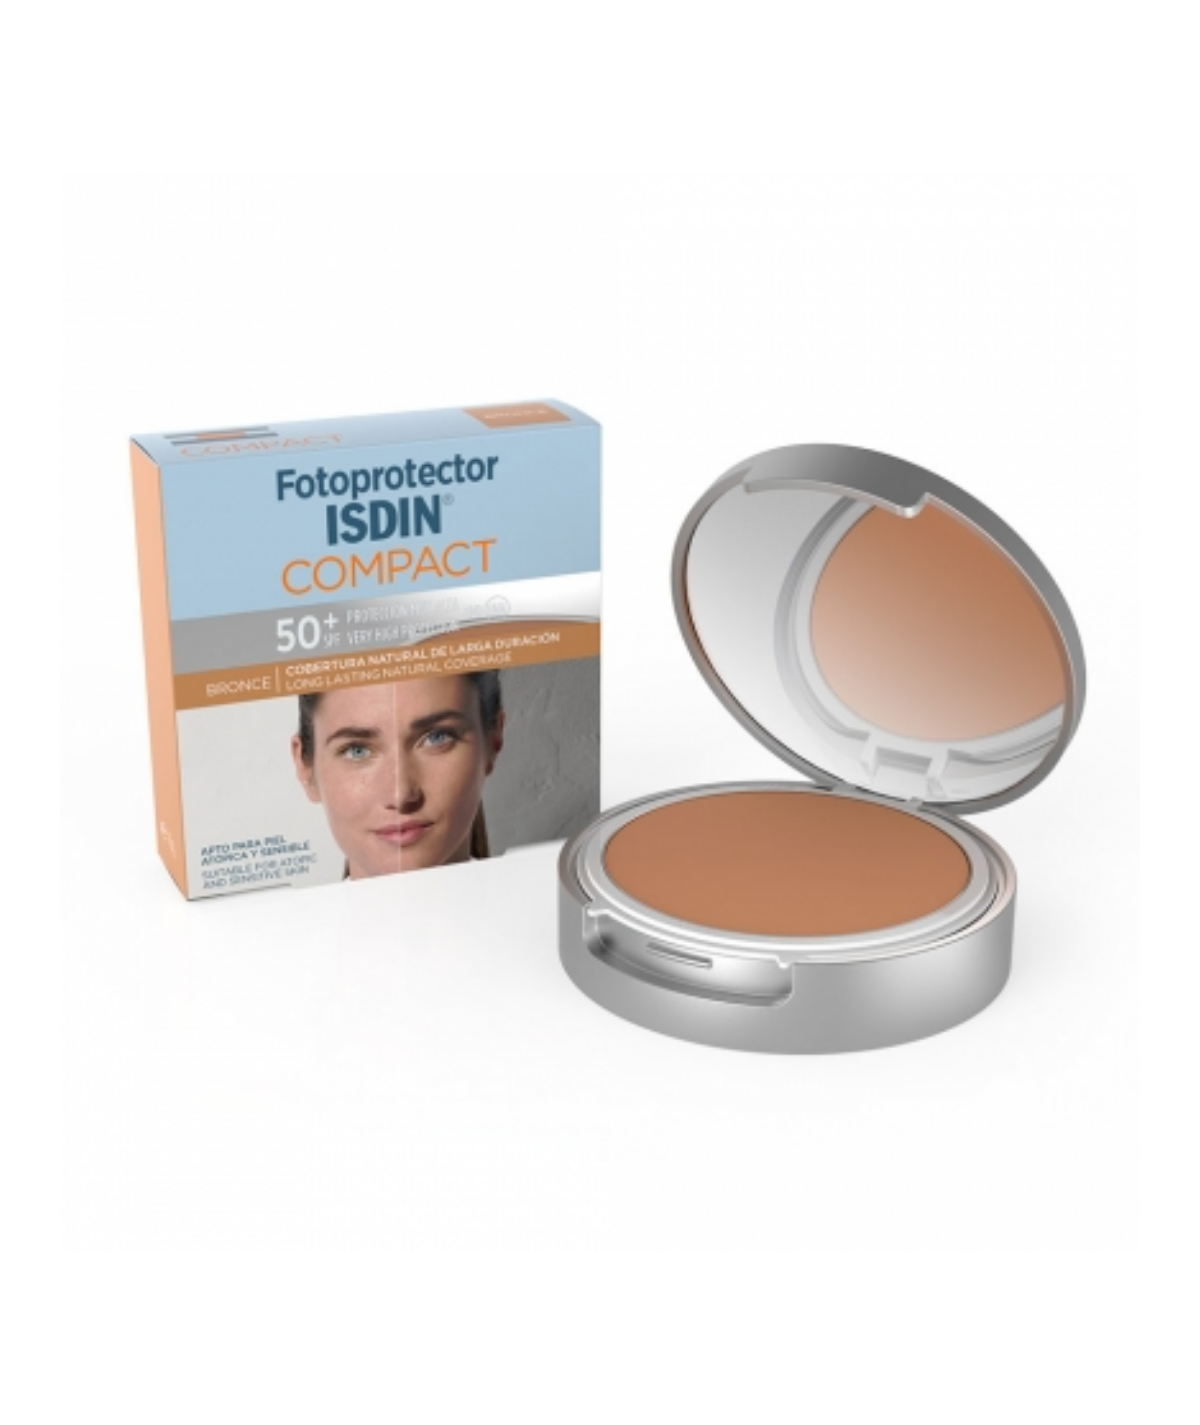 FOTOPROTECTOR ISDIN COMPACT SPF-50+ BRONCE 10 G